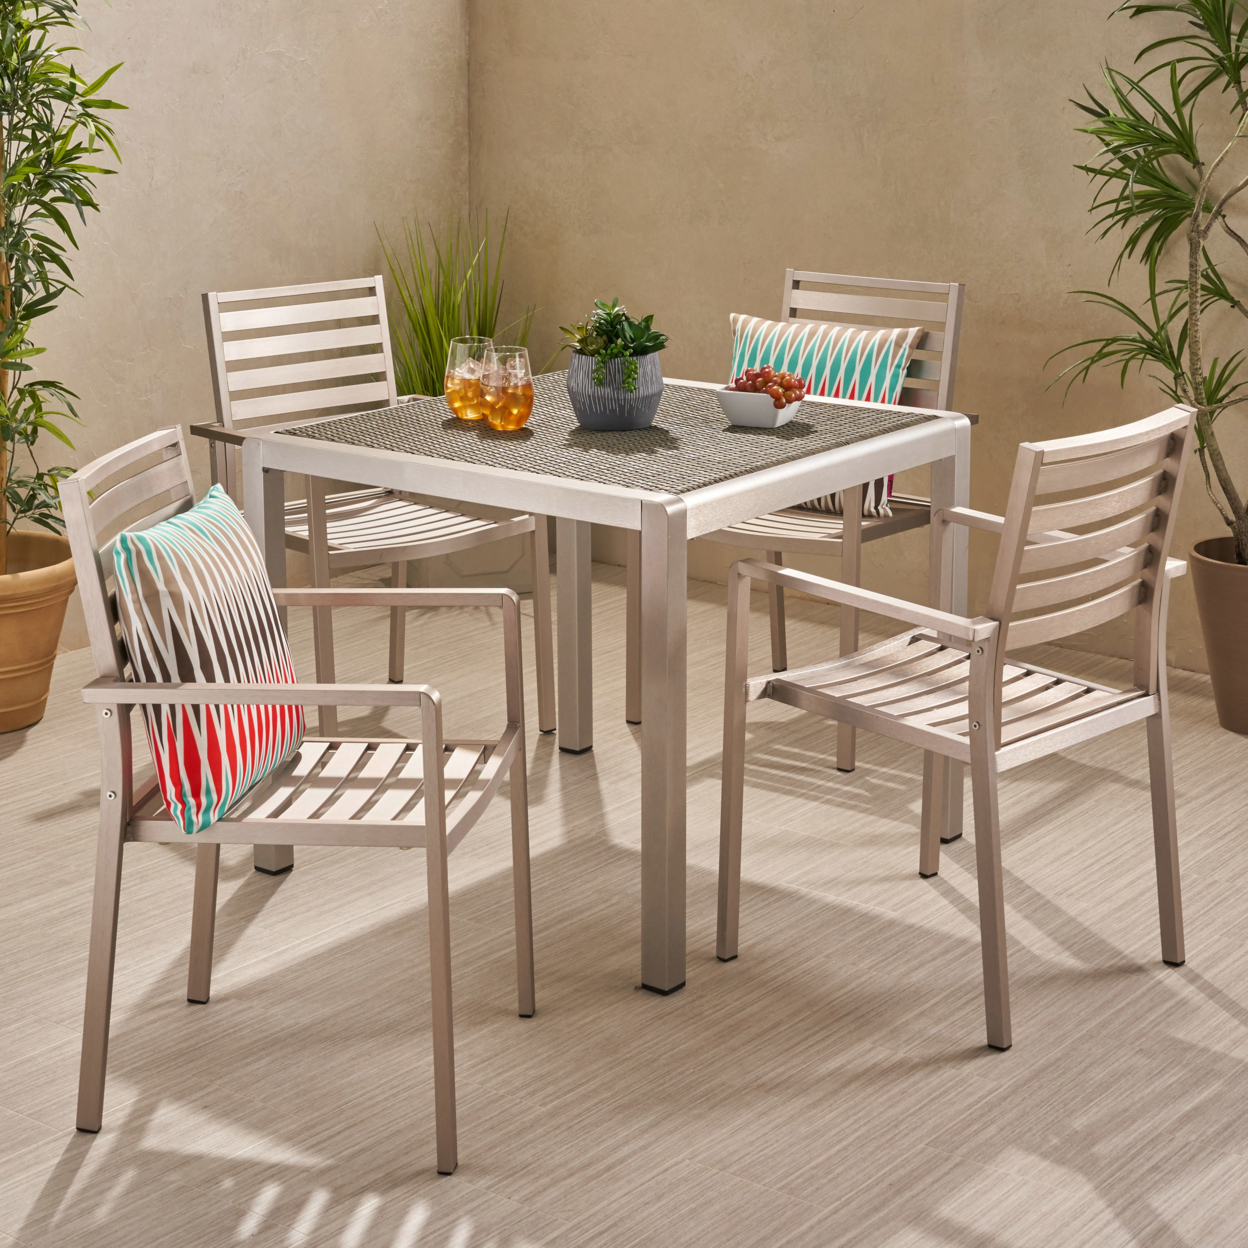 Christal Outdoor Modern 4 Seater Aluminum Dining Set With Faux Wood Table Top - Aluminum + Faux Rattan